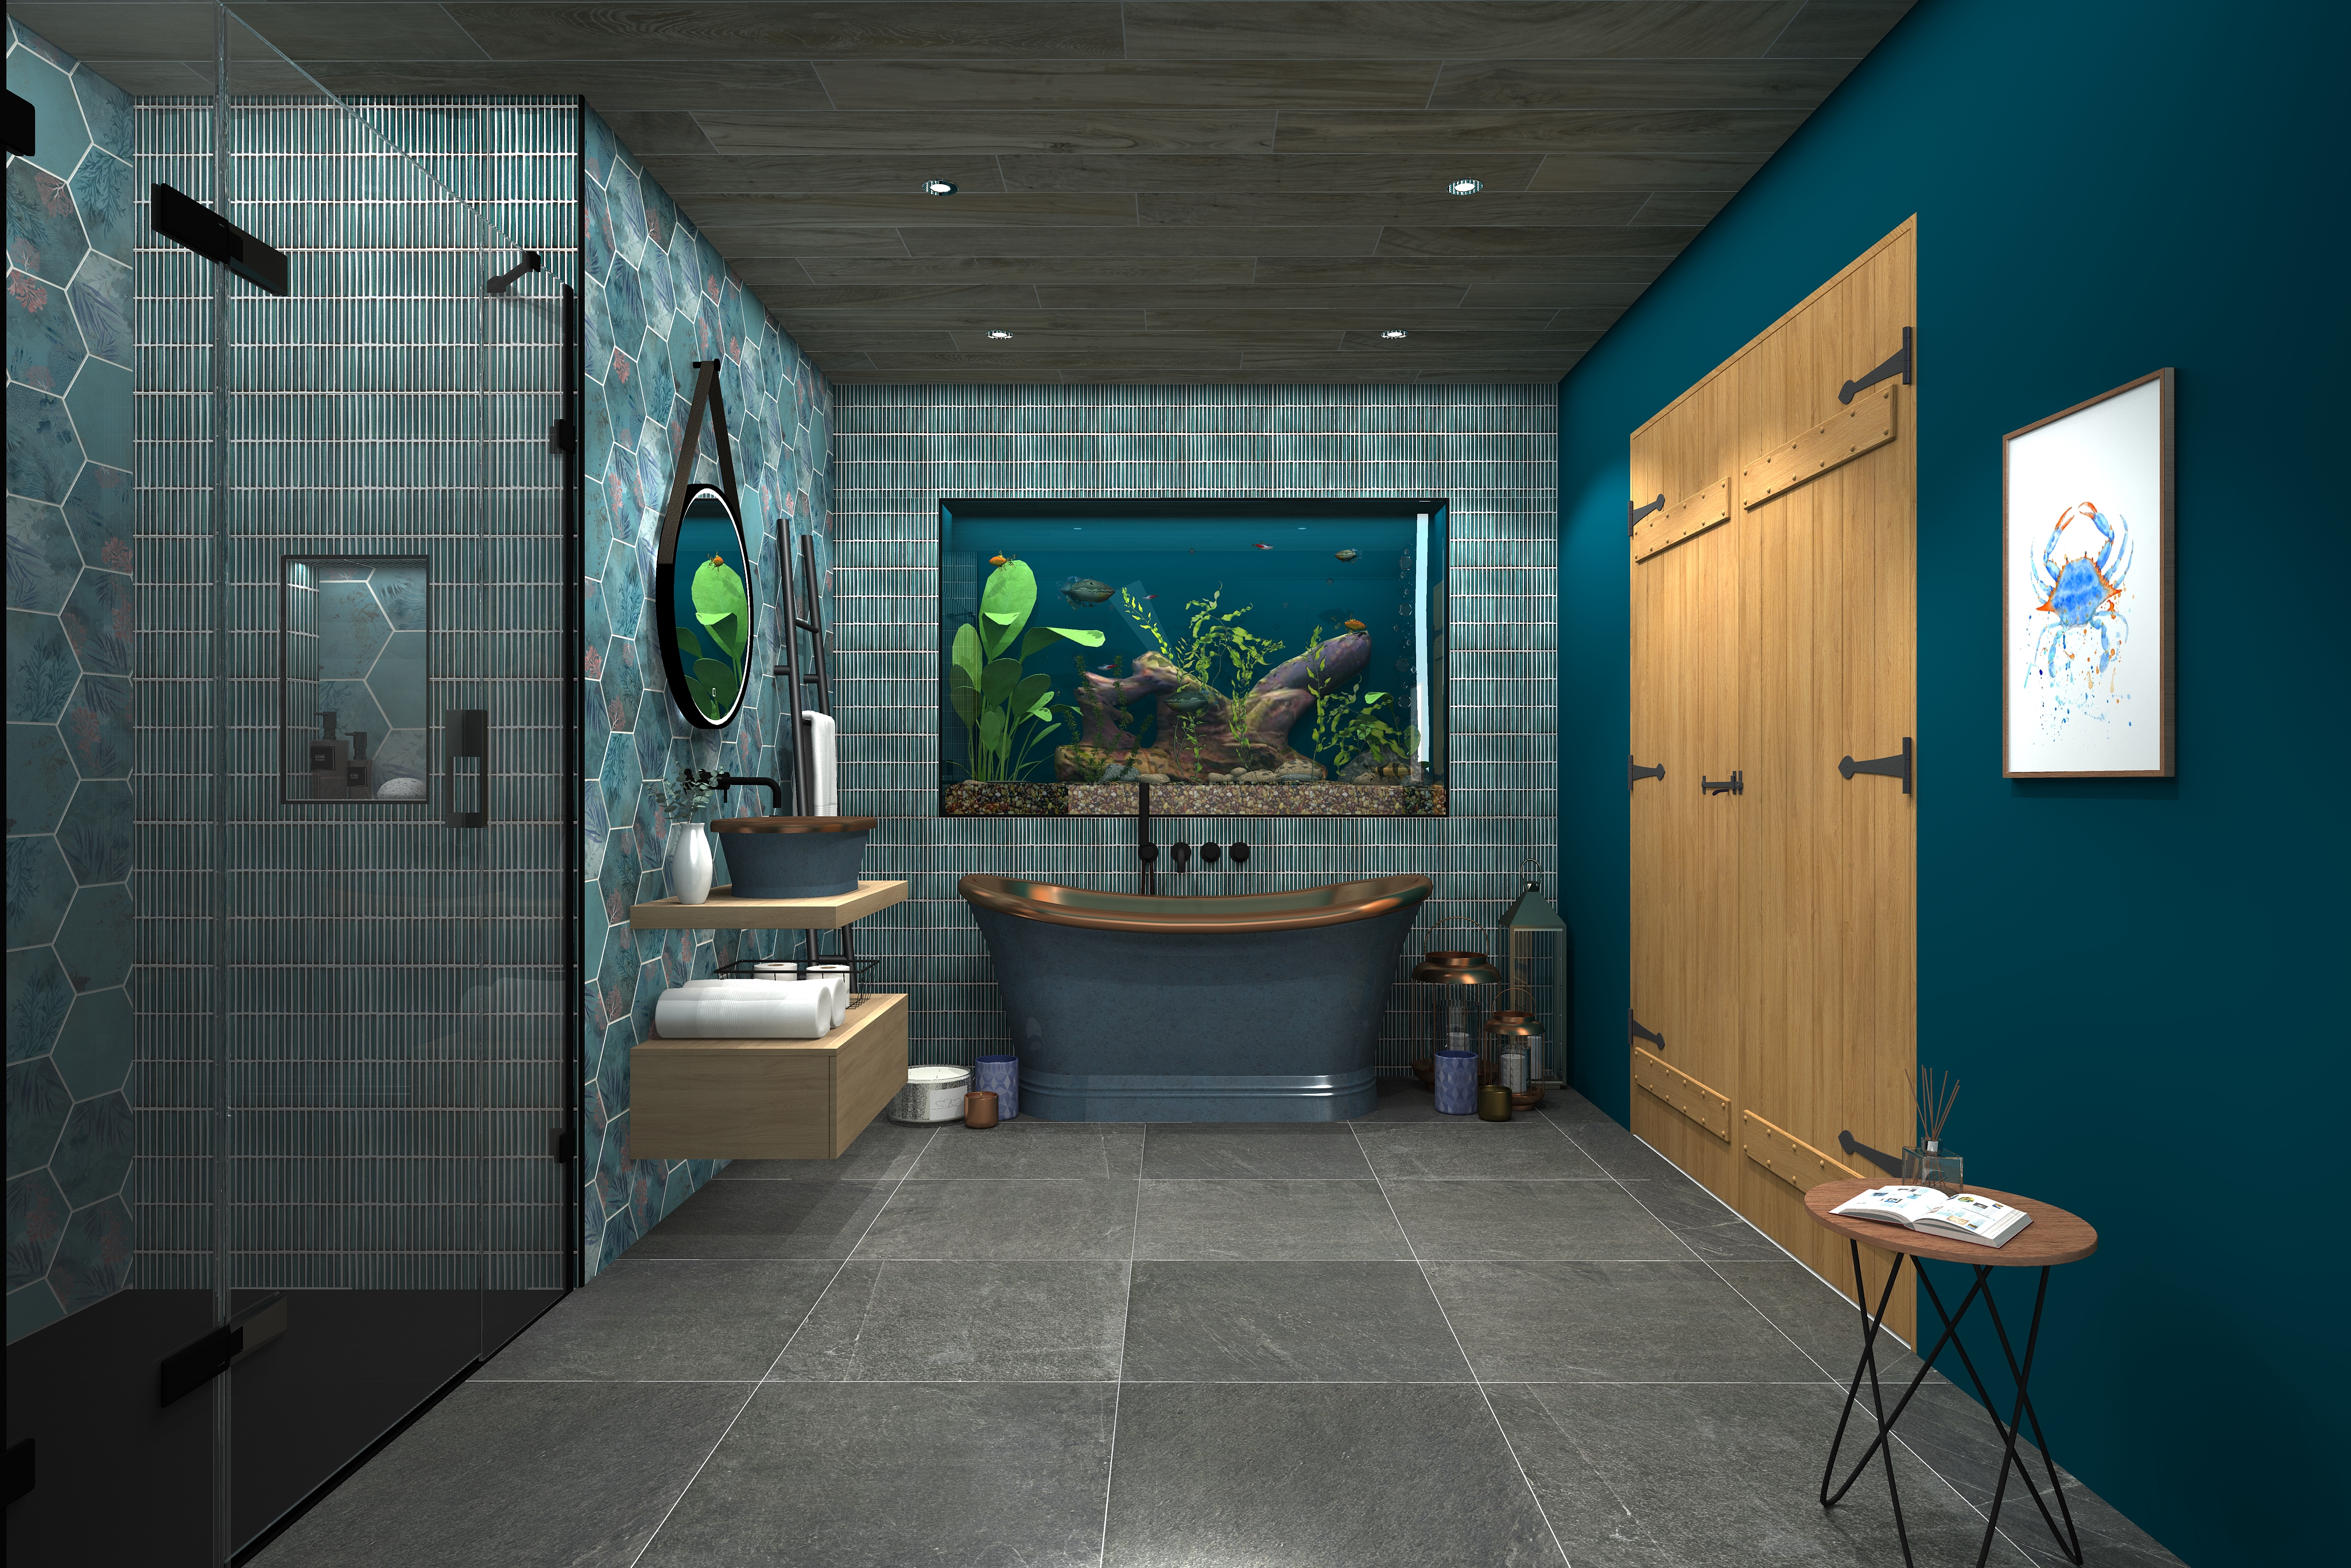 Digital lifestyle image of the Cancer inspired bathroom, with wooden double doors, Industrial style table with diffuser, an assortment of candles in glass lanterns either side of the teal roll top boat bath, matt black wall mounted bath filler and handset shower and an integrated fishtank